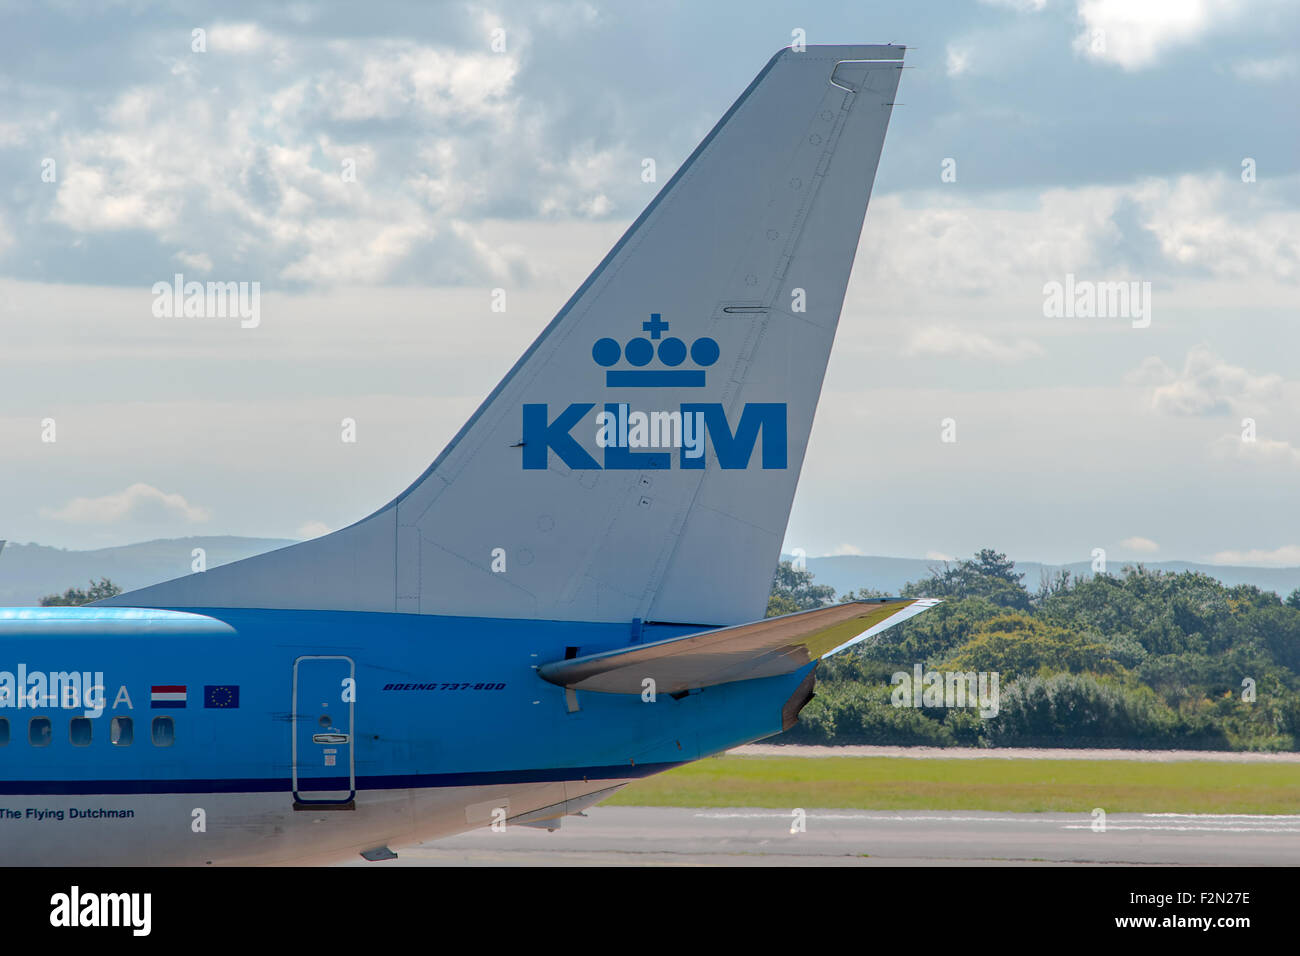 MANCHESTER, UNITED KINGDOM - AUG 07, 2015: KLM Royal Dutch Airlines Boeing 737 tail livery at Manchester Airport Aug 07 2015. Stock Photo